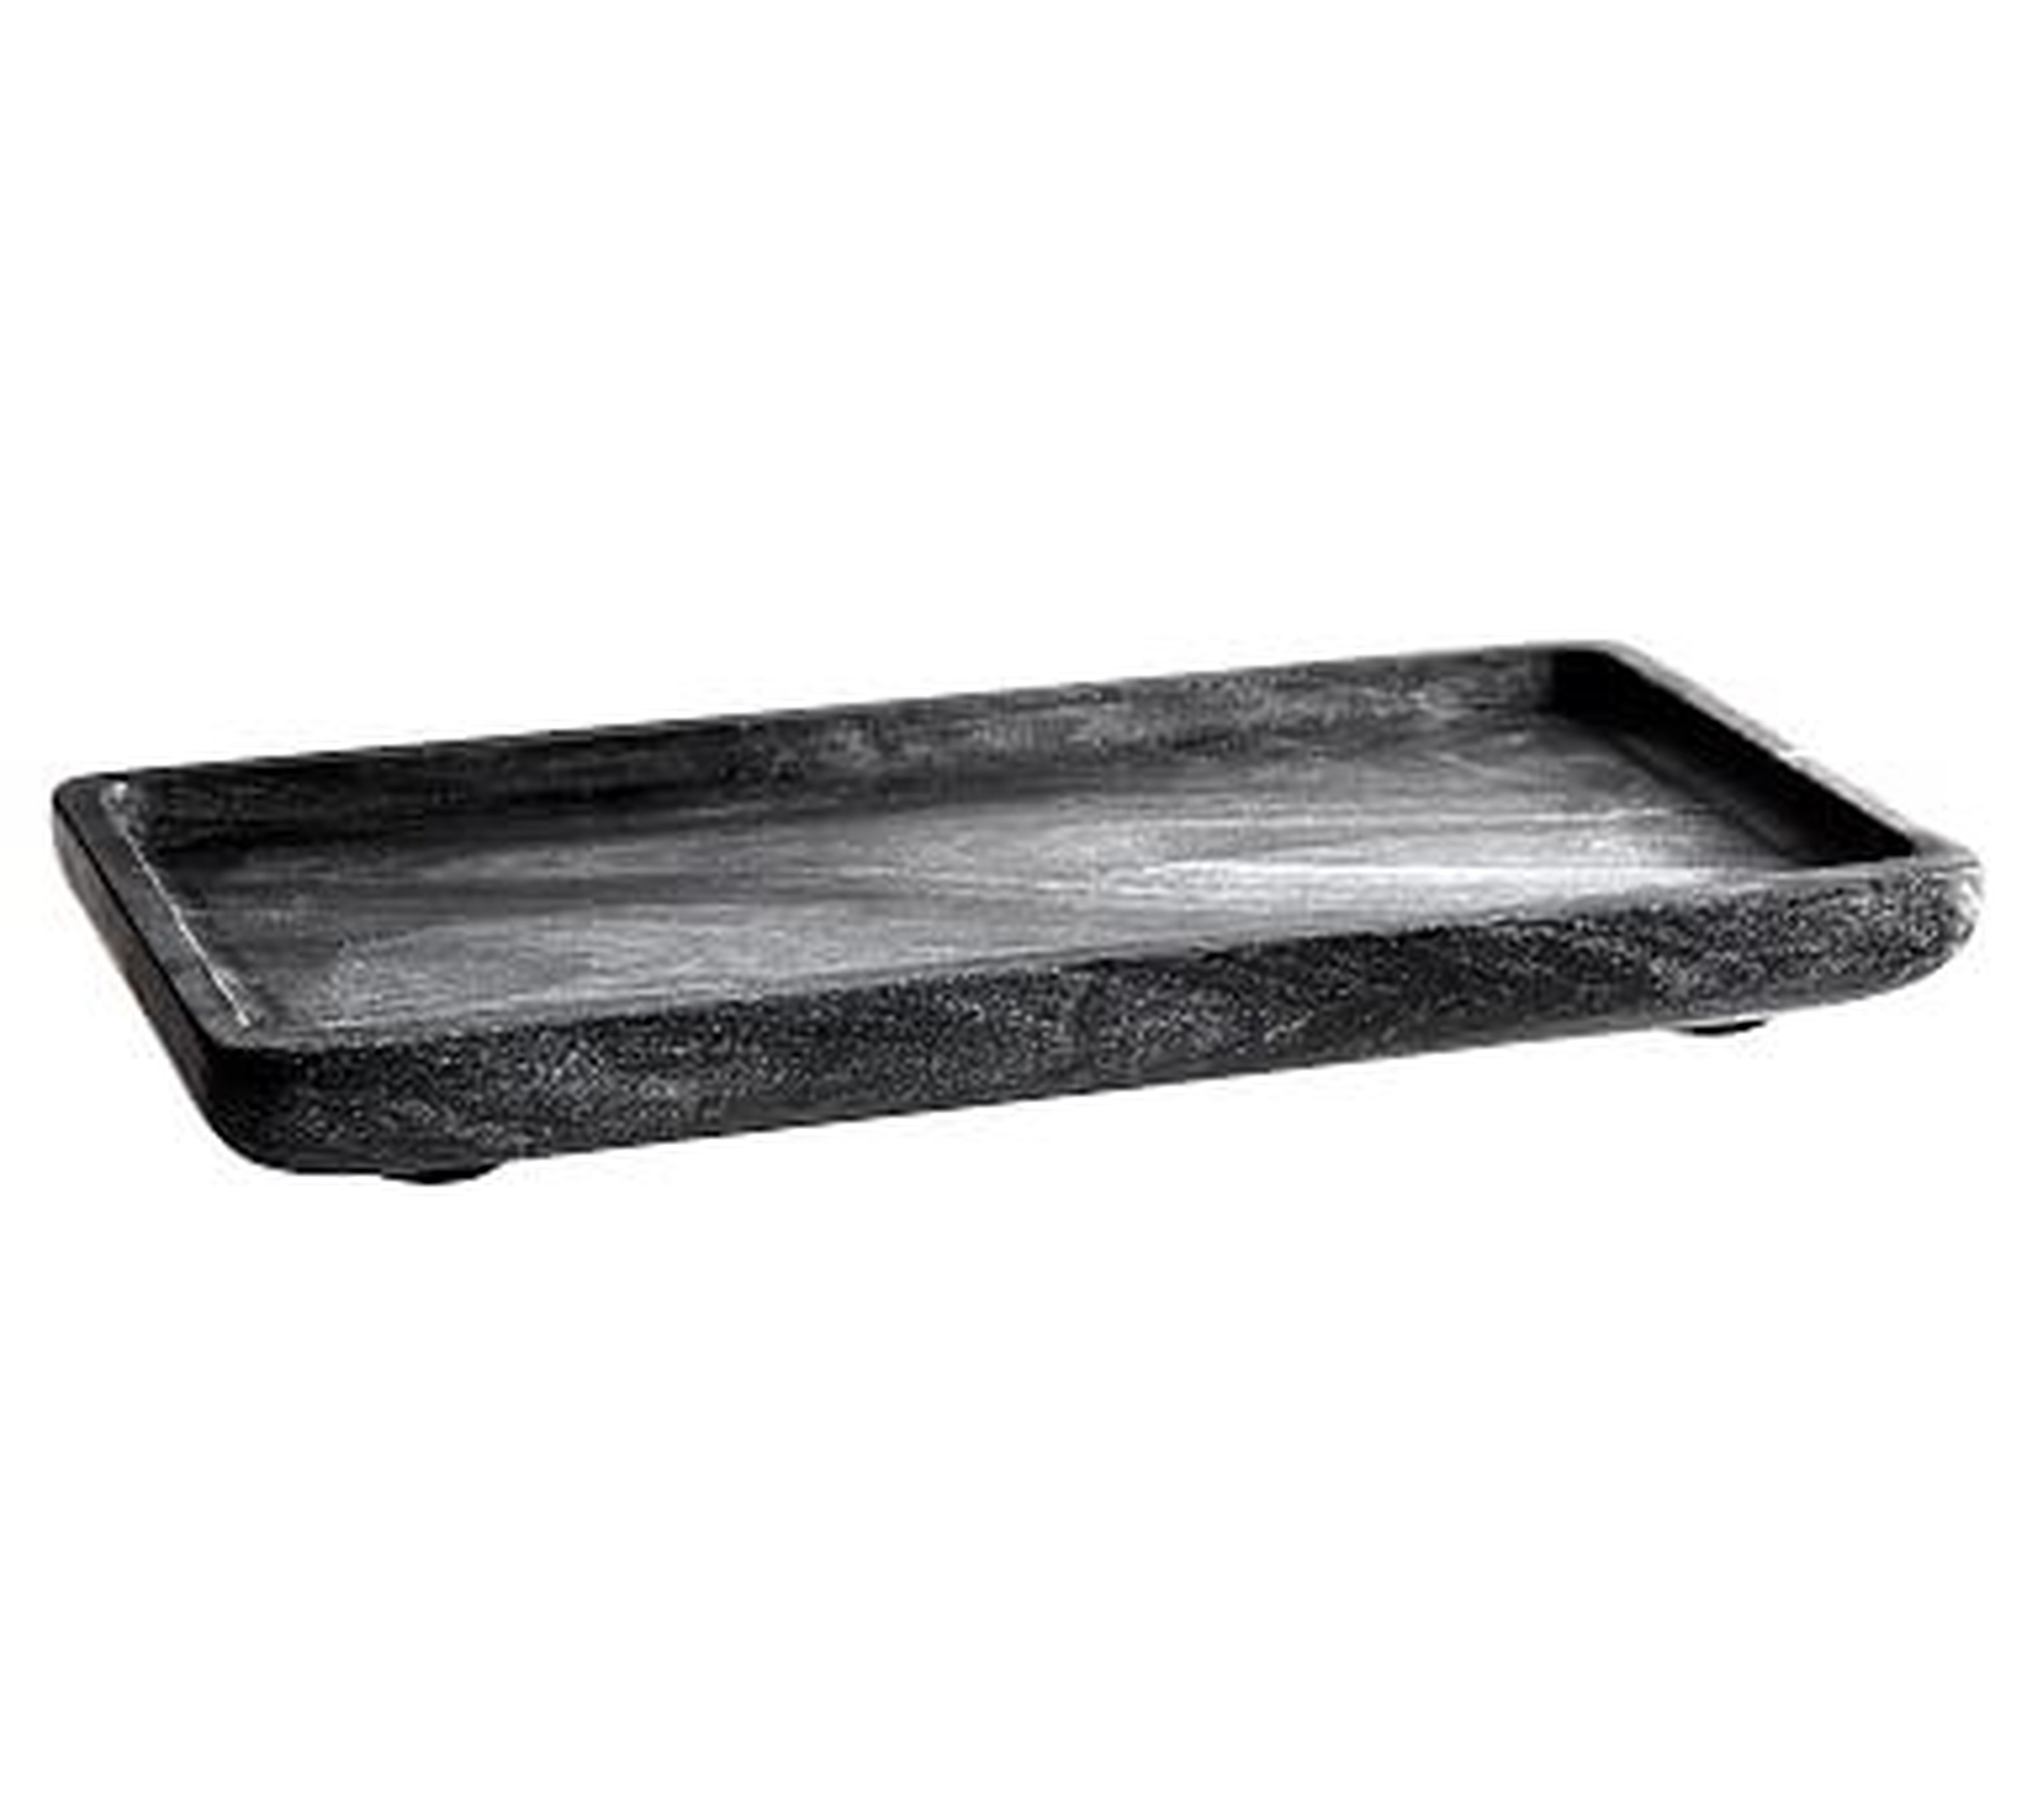 Marble Accessories, Tray, Black - Pottery Barn